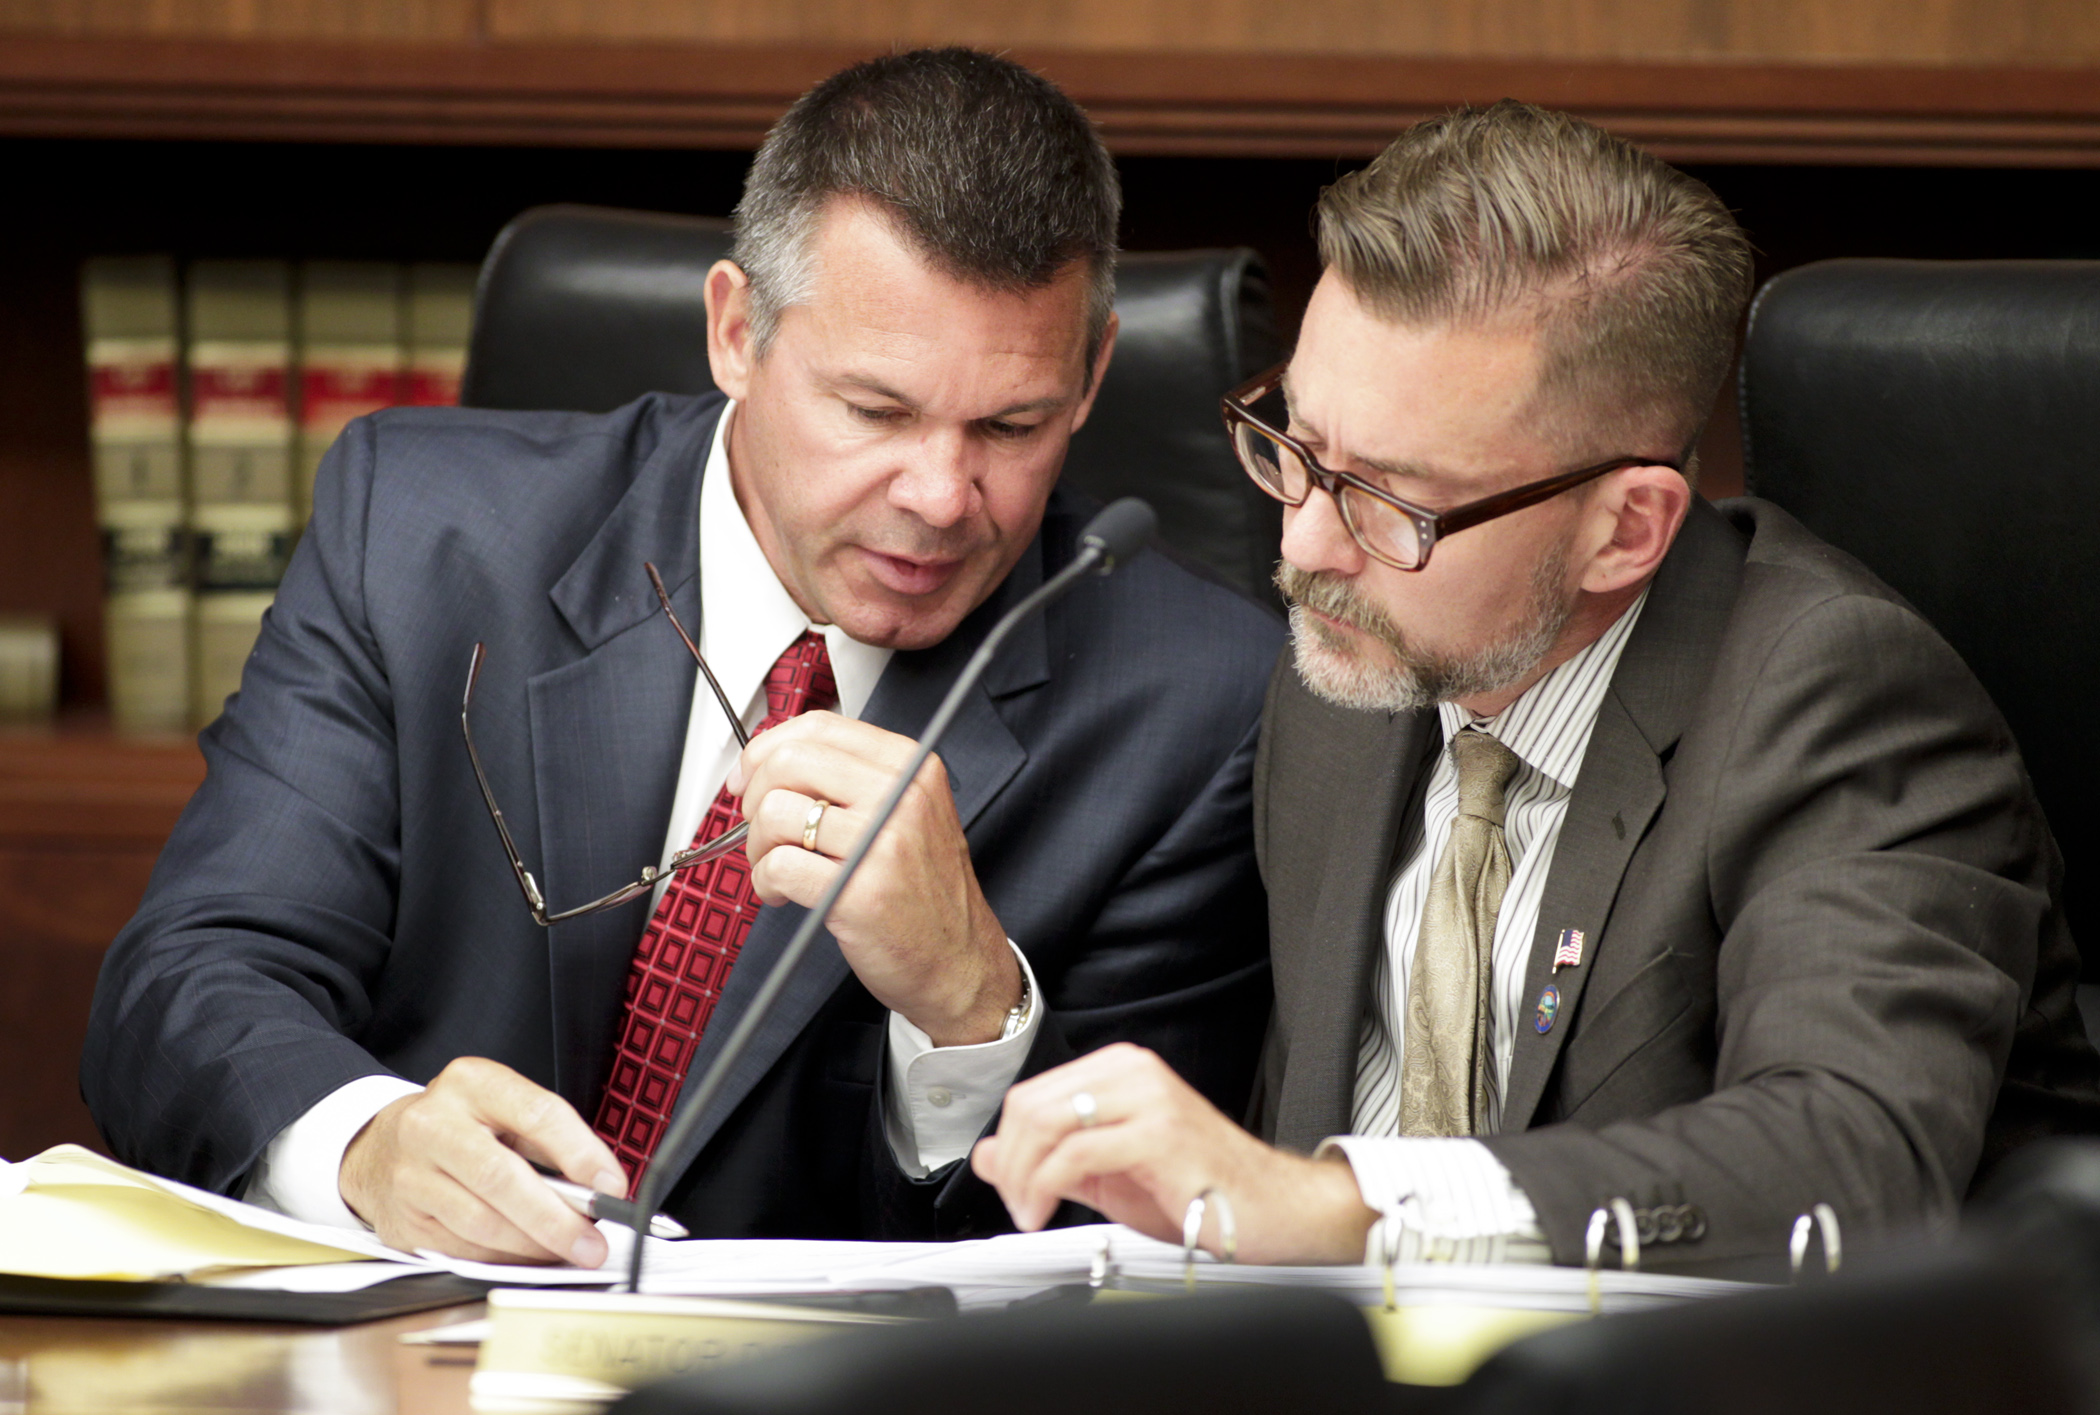 Rep. Tim Kelly, left, and Sen. D. Scott Dibble confer as members listen to a side-by-side comparison of the two bills during the first meeting of the conference committee on the omnibus transportation policy and finance bill May 6. Photo by Paul Battaglia